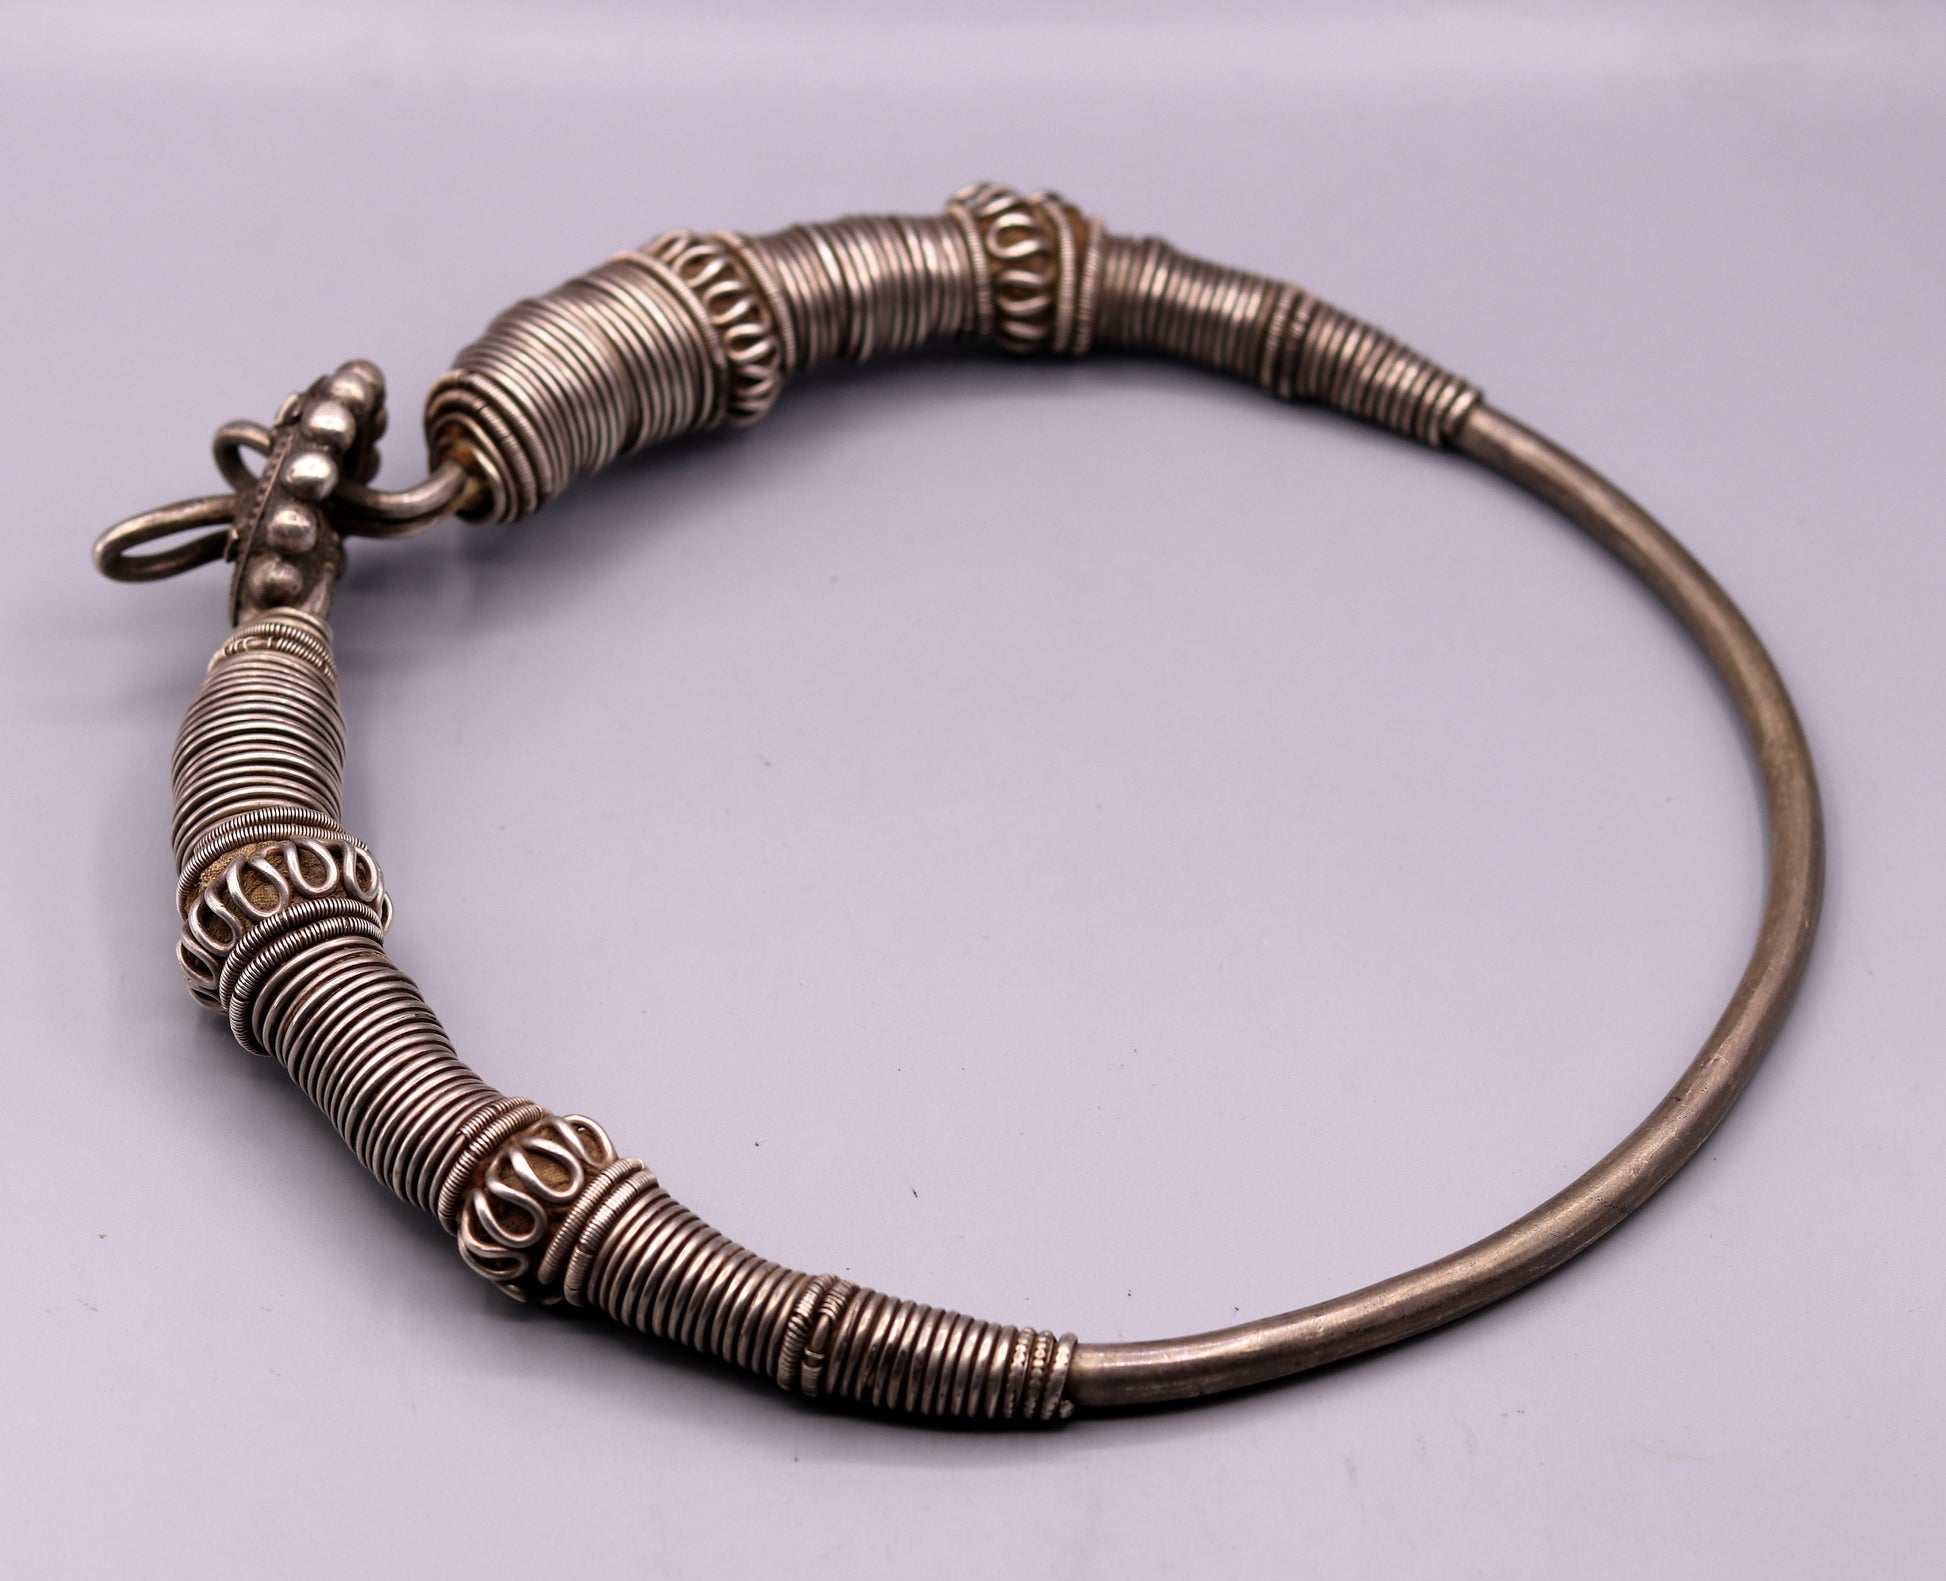 Vintage antique solid silver handmade necklace choker indian tribal jewelry 'hasali' necklace from india Rajasthan osn04 - TRIBAL ORNAMENTS